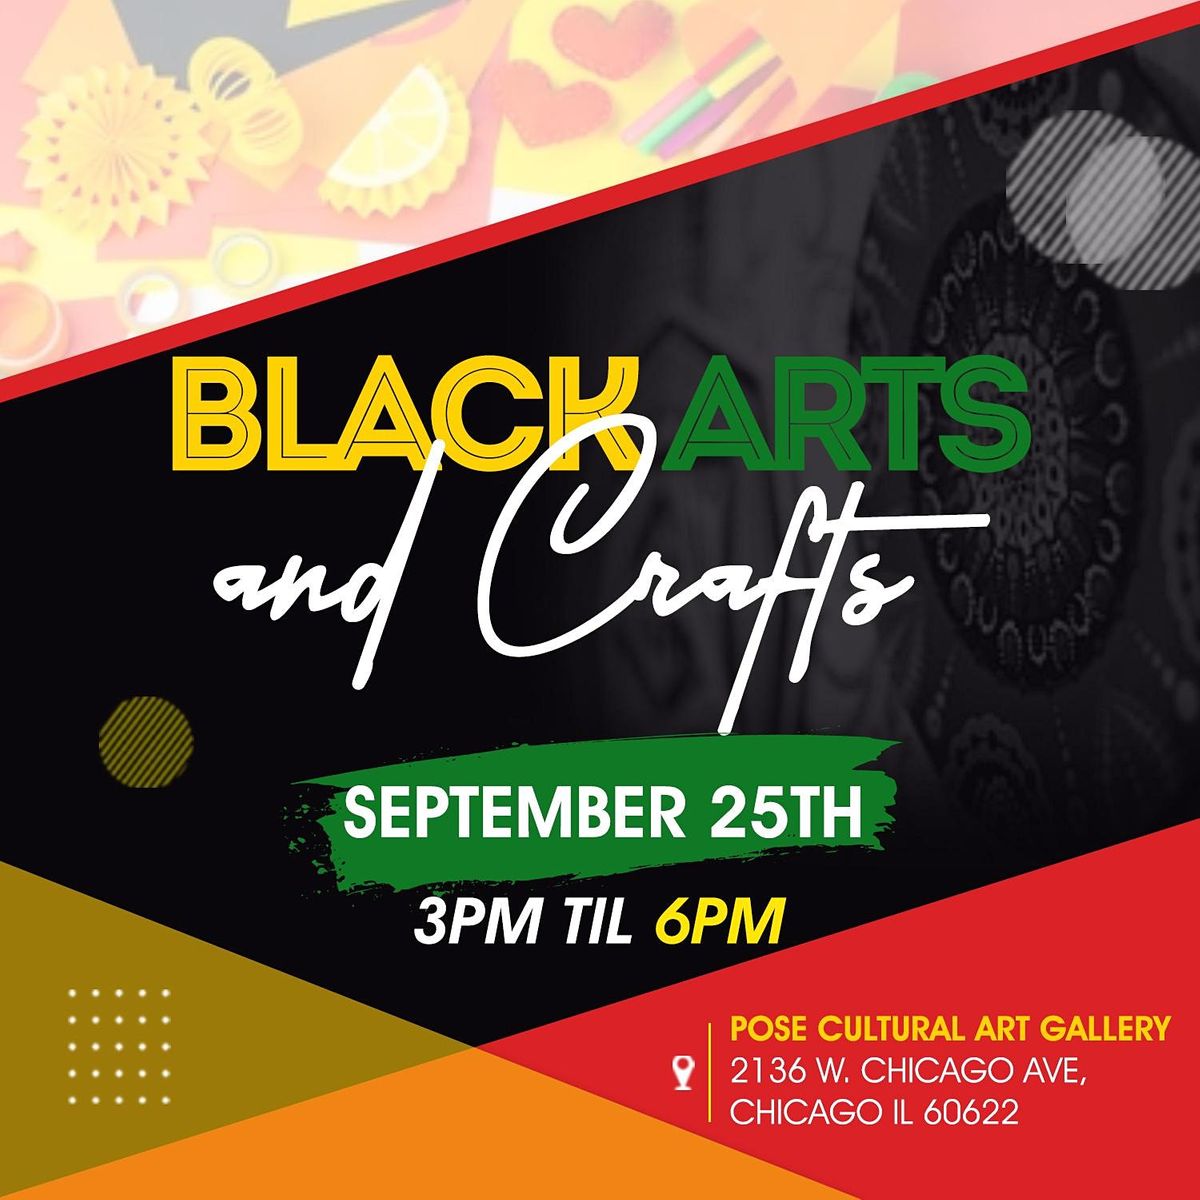 BLACK ARTS AND CRAFT SHOW